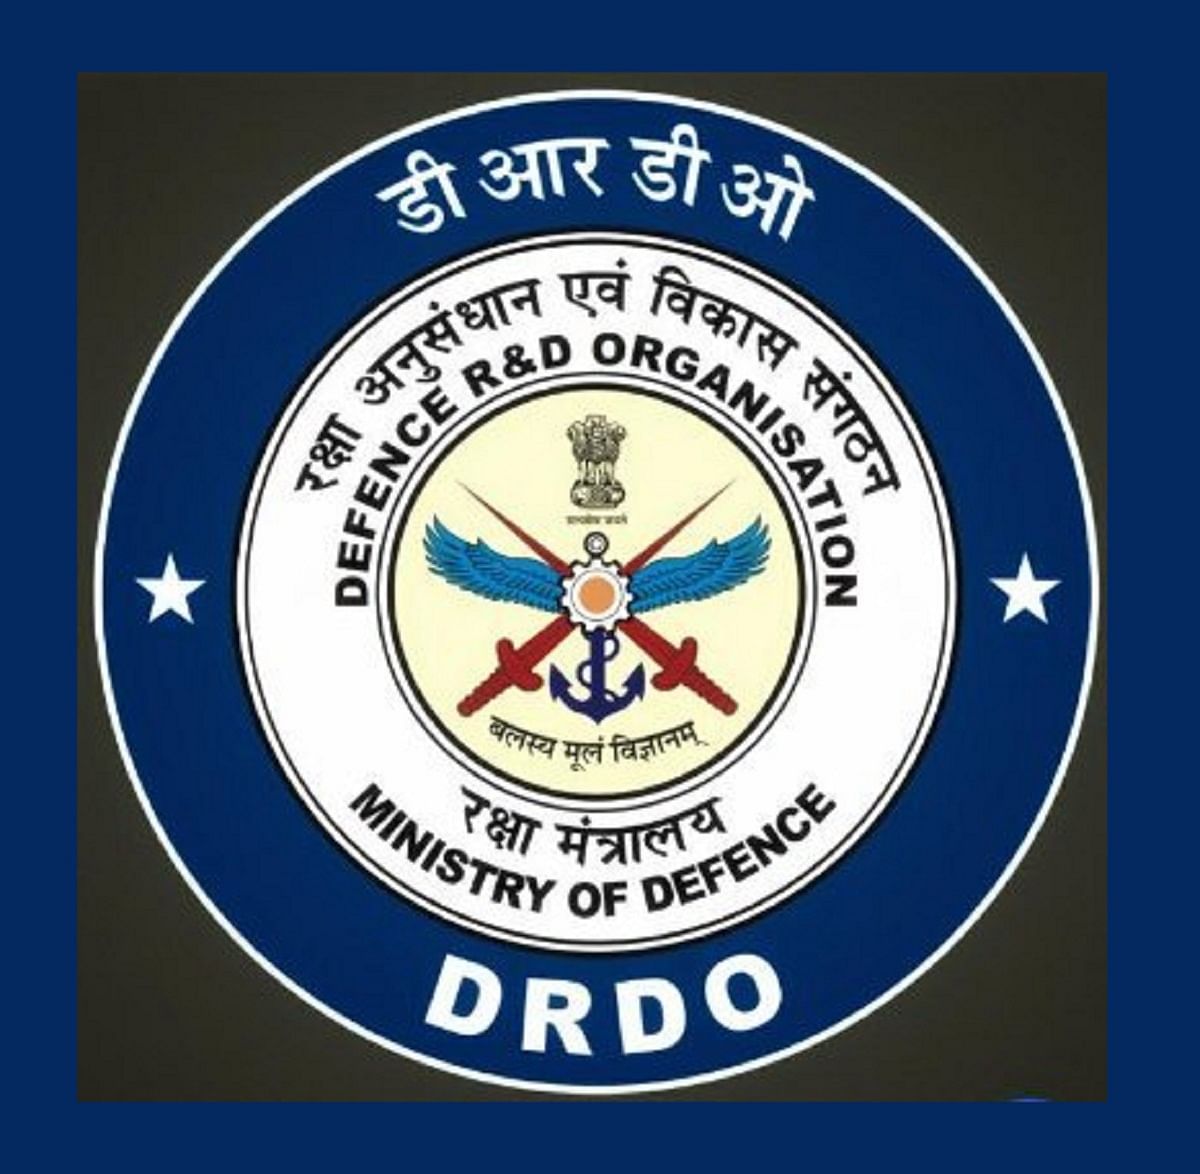 DRDO Recruitment 2021: Last Date to Apply for 116 Apprentice Trainee Posts, Details Here